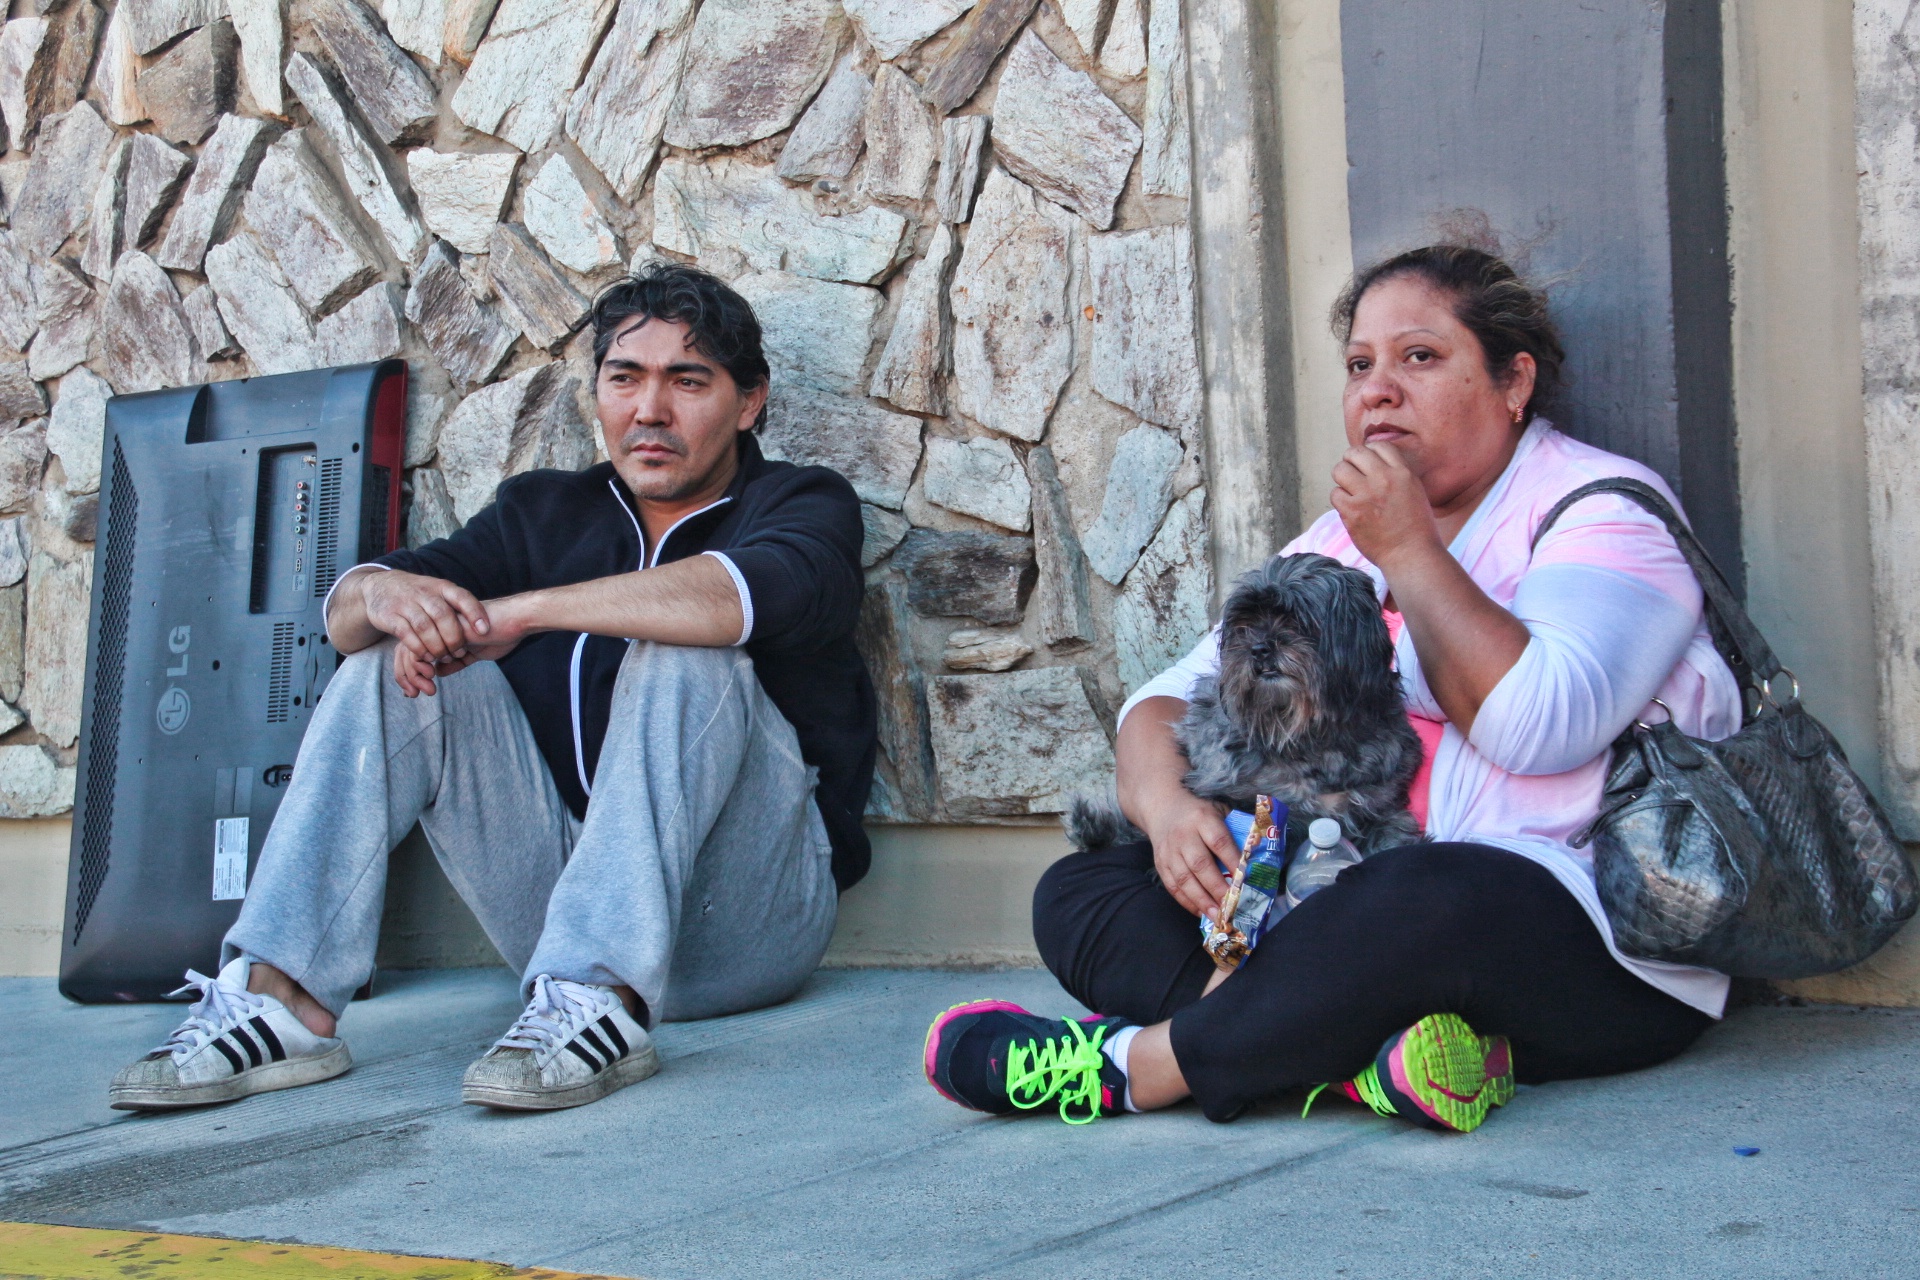 Families wait for transport to Salvation Army Shelter on Saturday evening after the fire. Photo by Sana Saleem